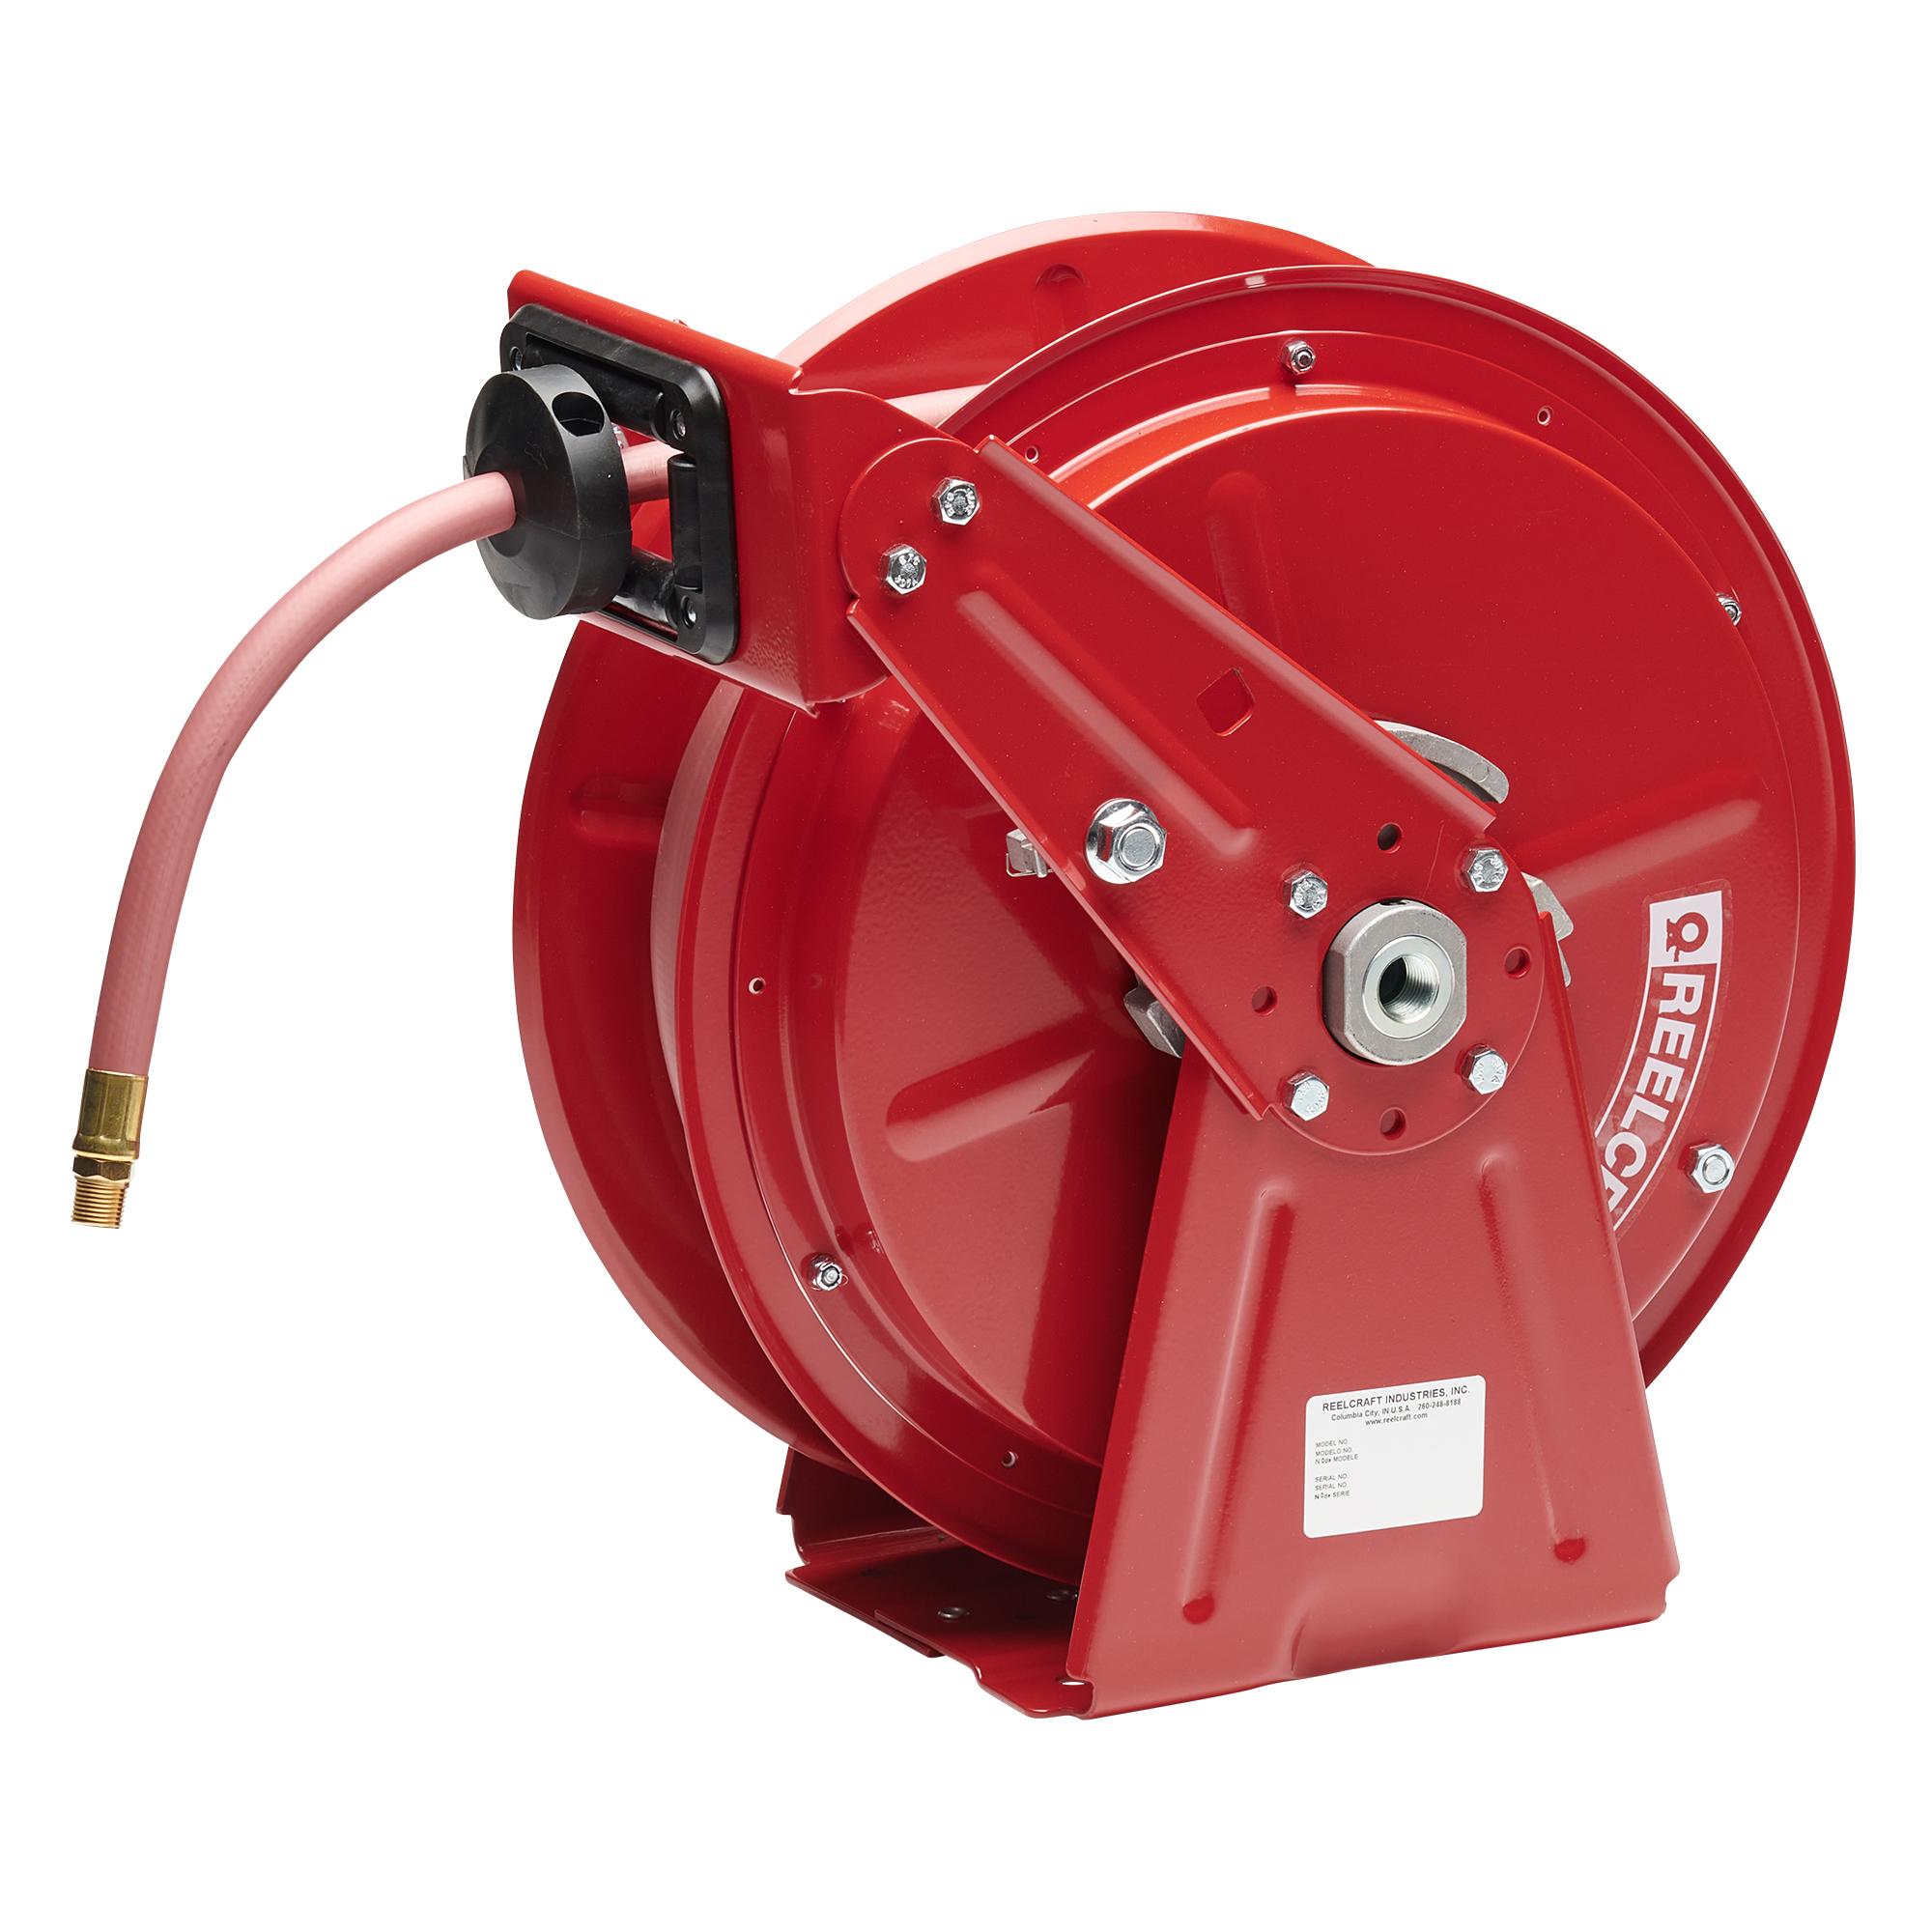 Reelcraft PW7650 Ohp 3/8x50' 4500 PSI Spring Retractable Pressure Wash Hose Reel